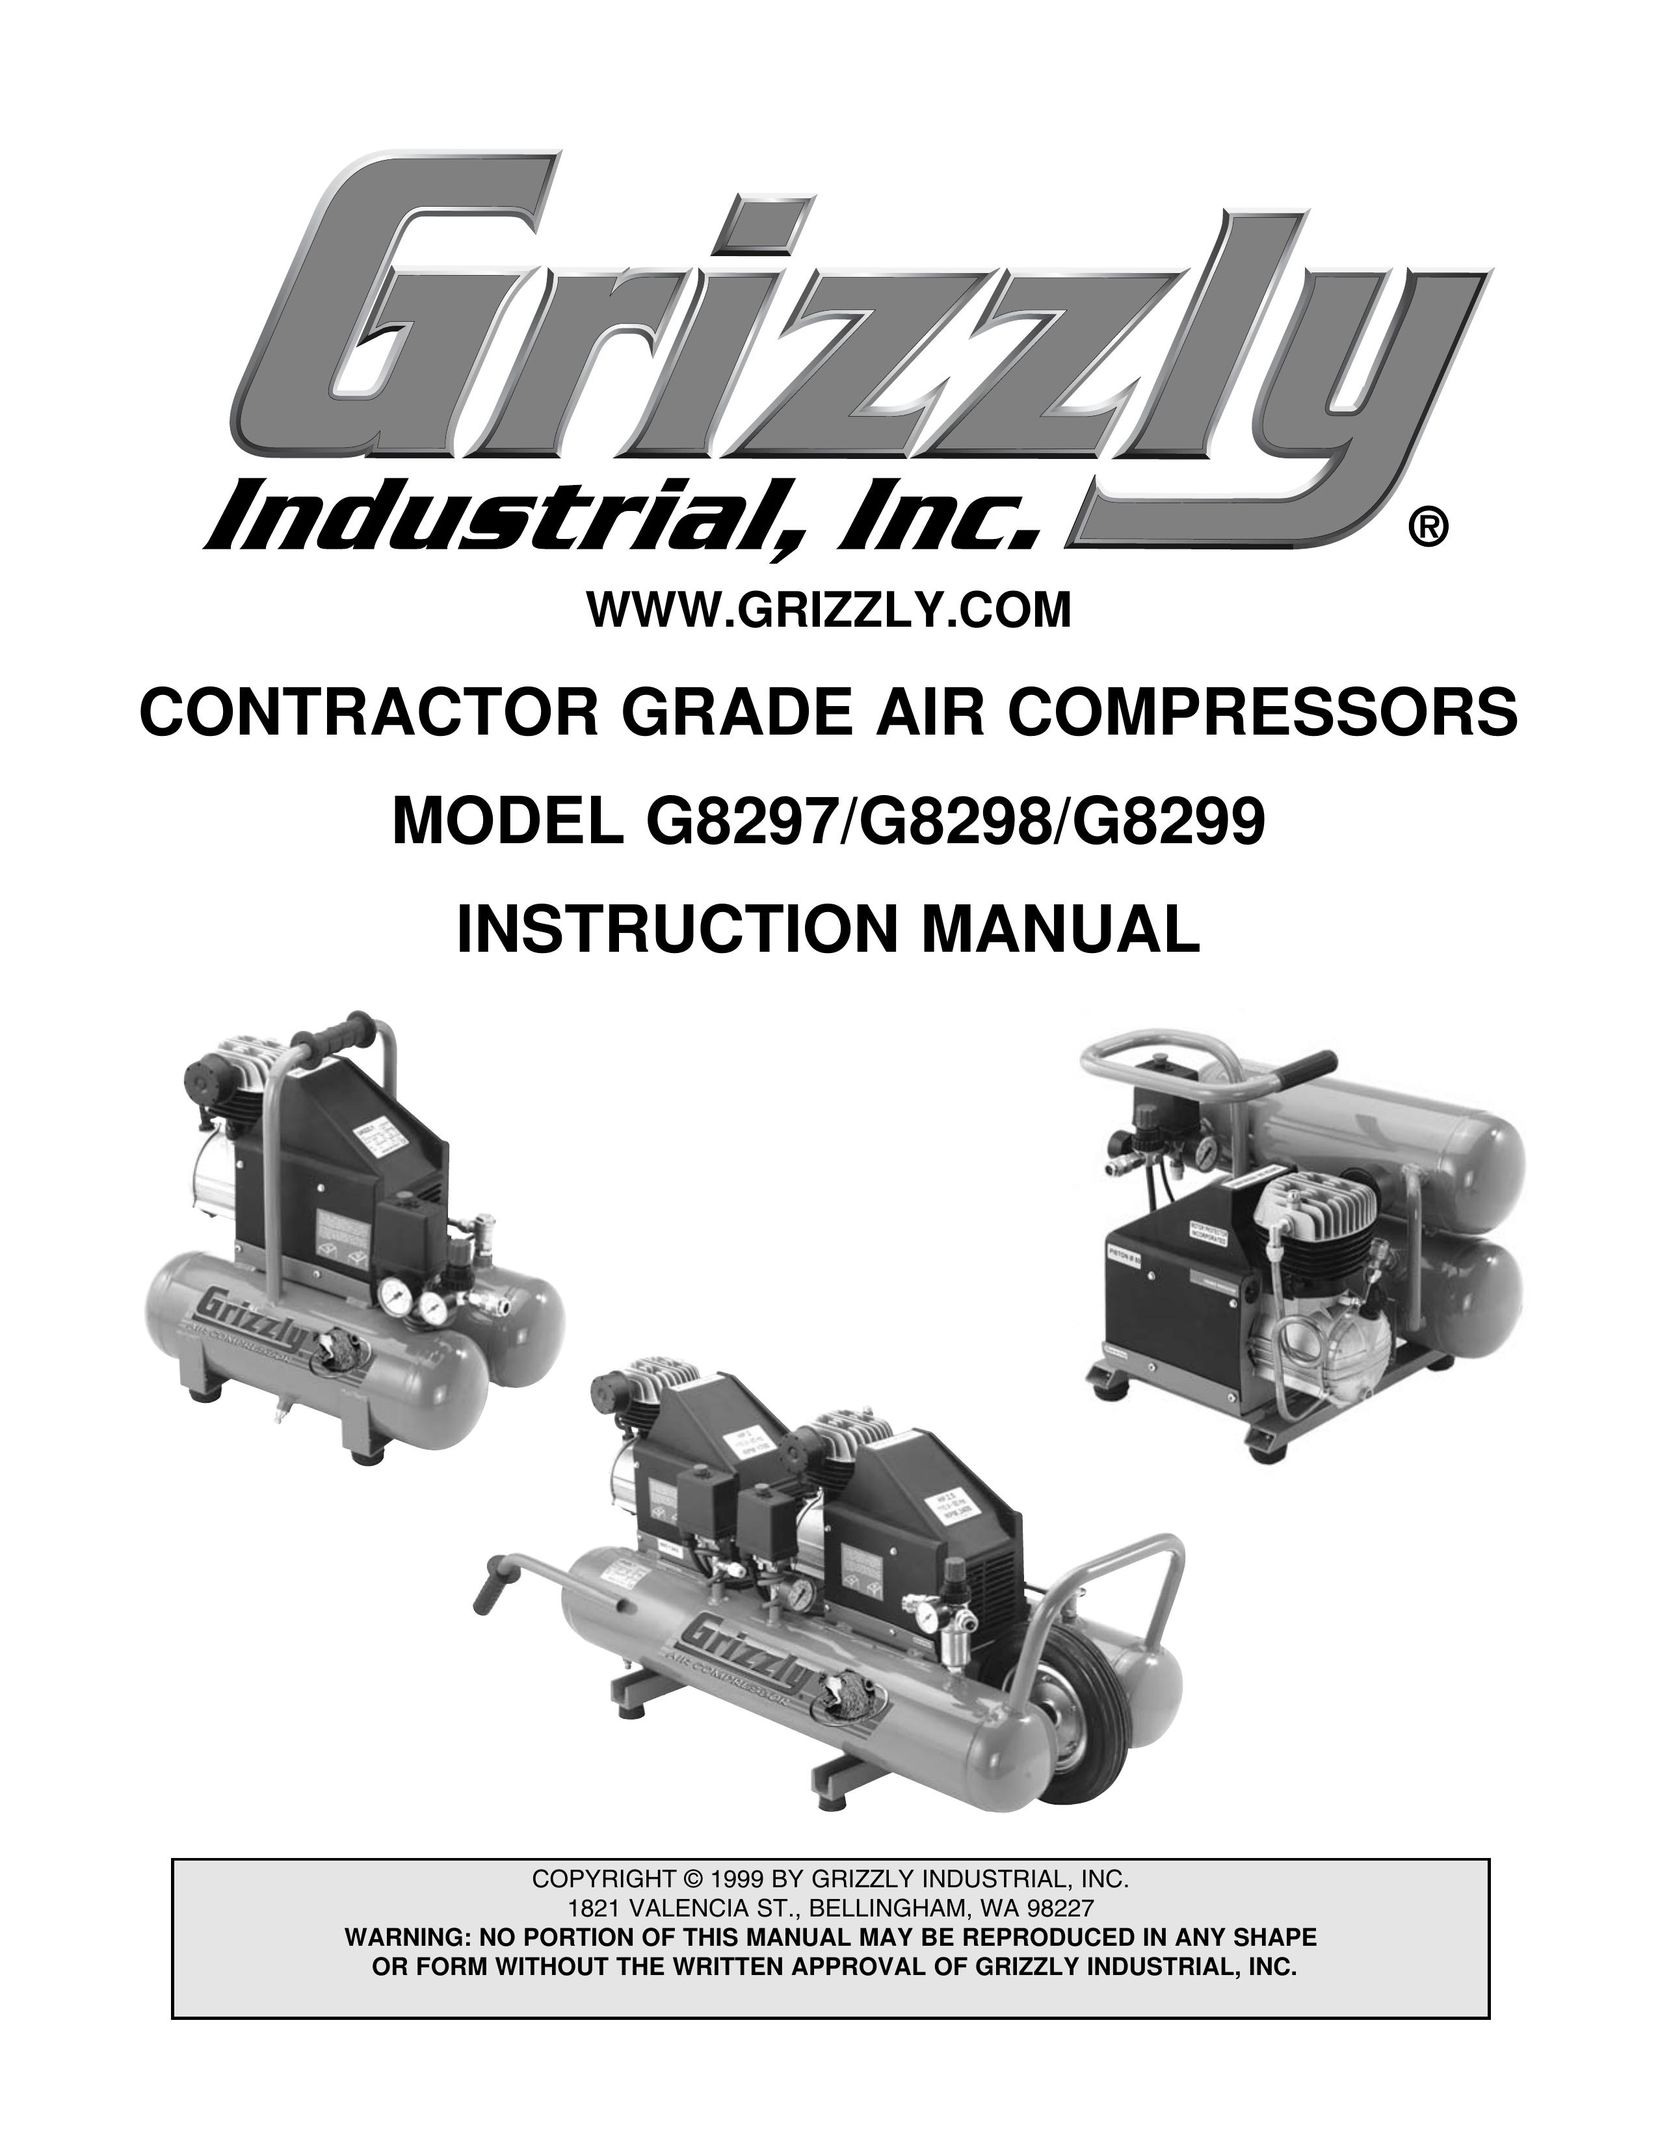 Grizzly G8297 Air Compressor User Manual